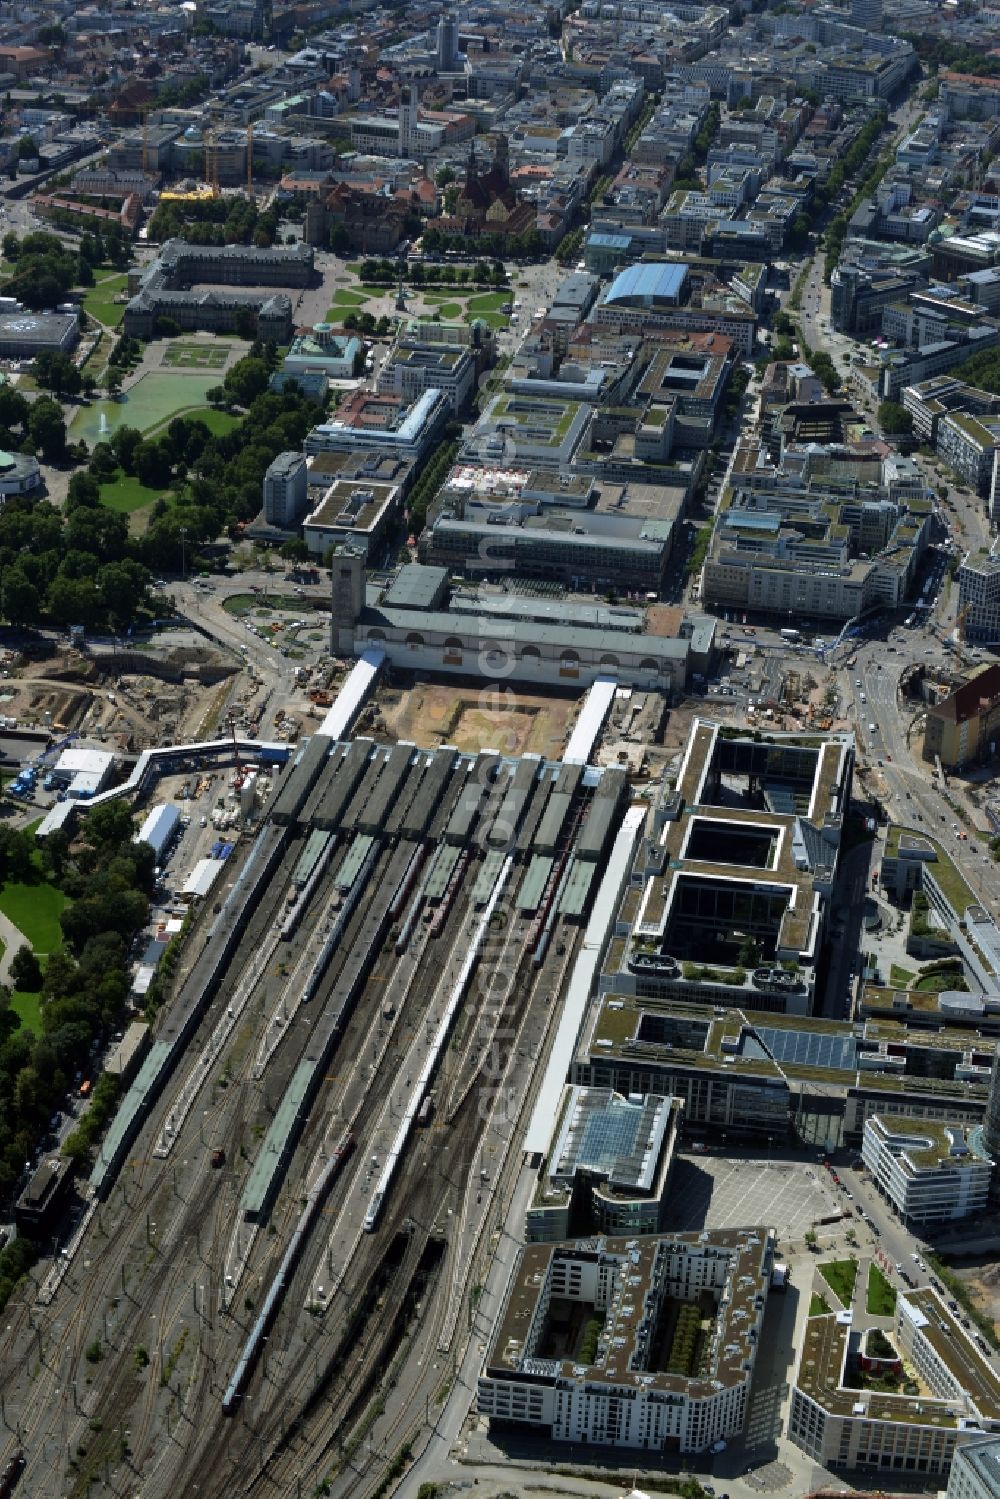 Aerial image Stuttgart - Construction site at the Stuttgart Central station in Baden-Wuerttemberg. The termnal station will be largely demolished during the project Stuttgart 21 and converted into an underground transit station